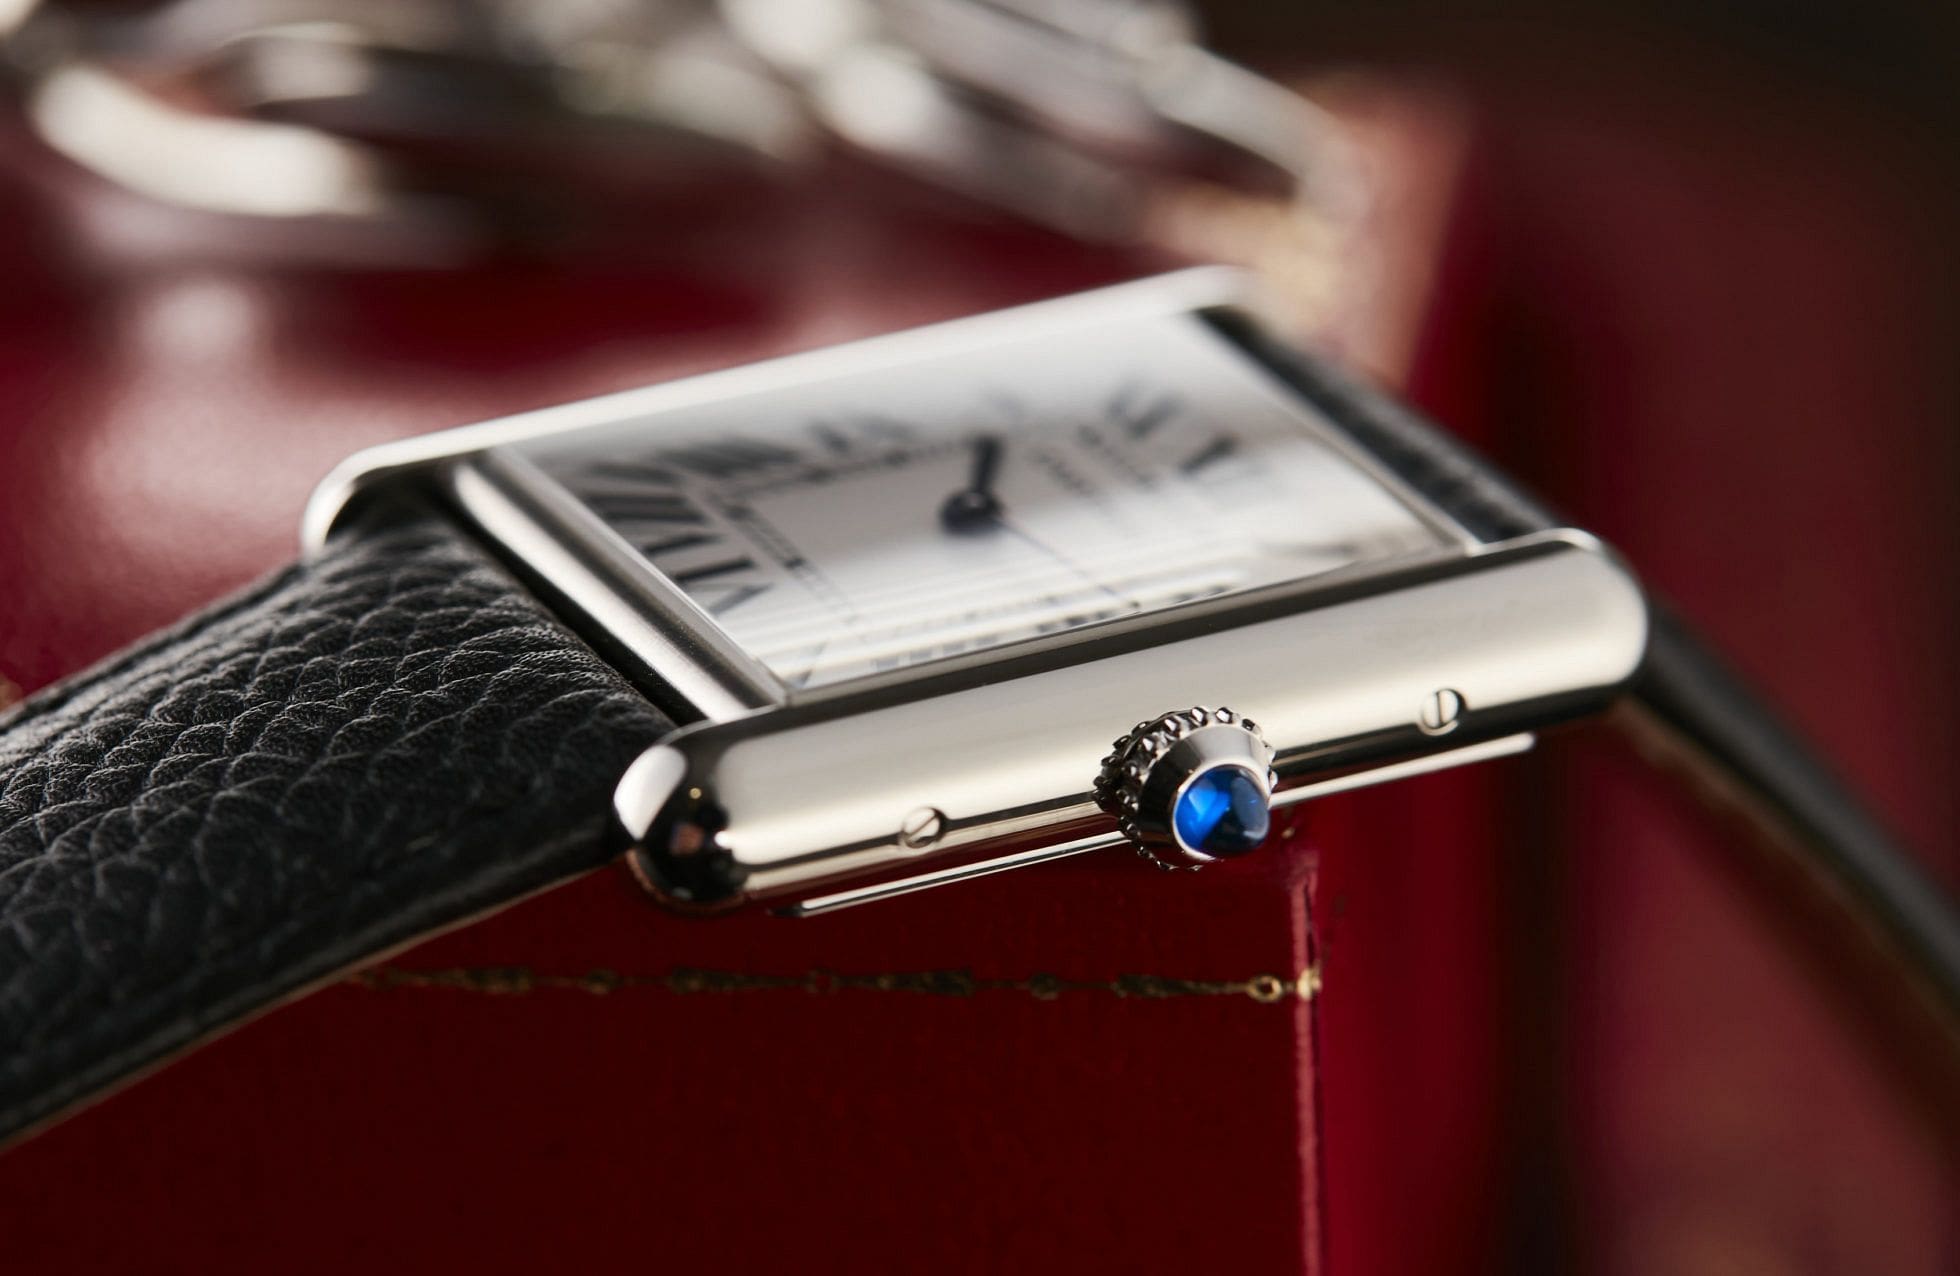 The new adventures of the Cartier Tank include a solar-powered watch